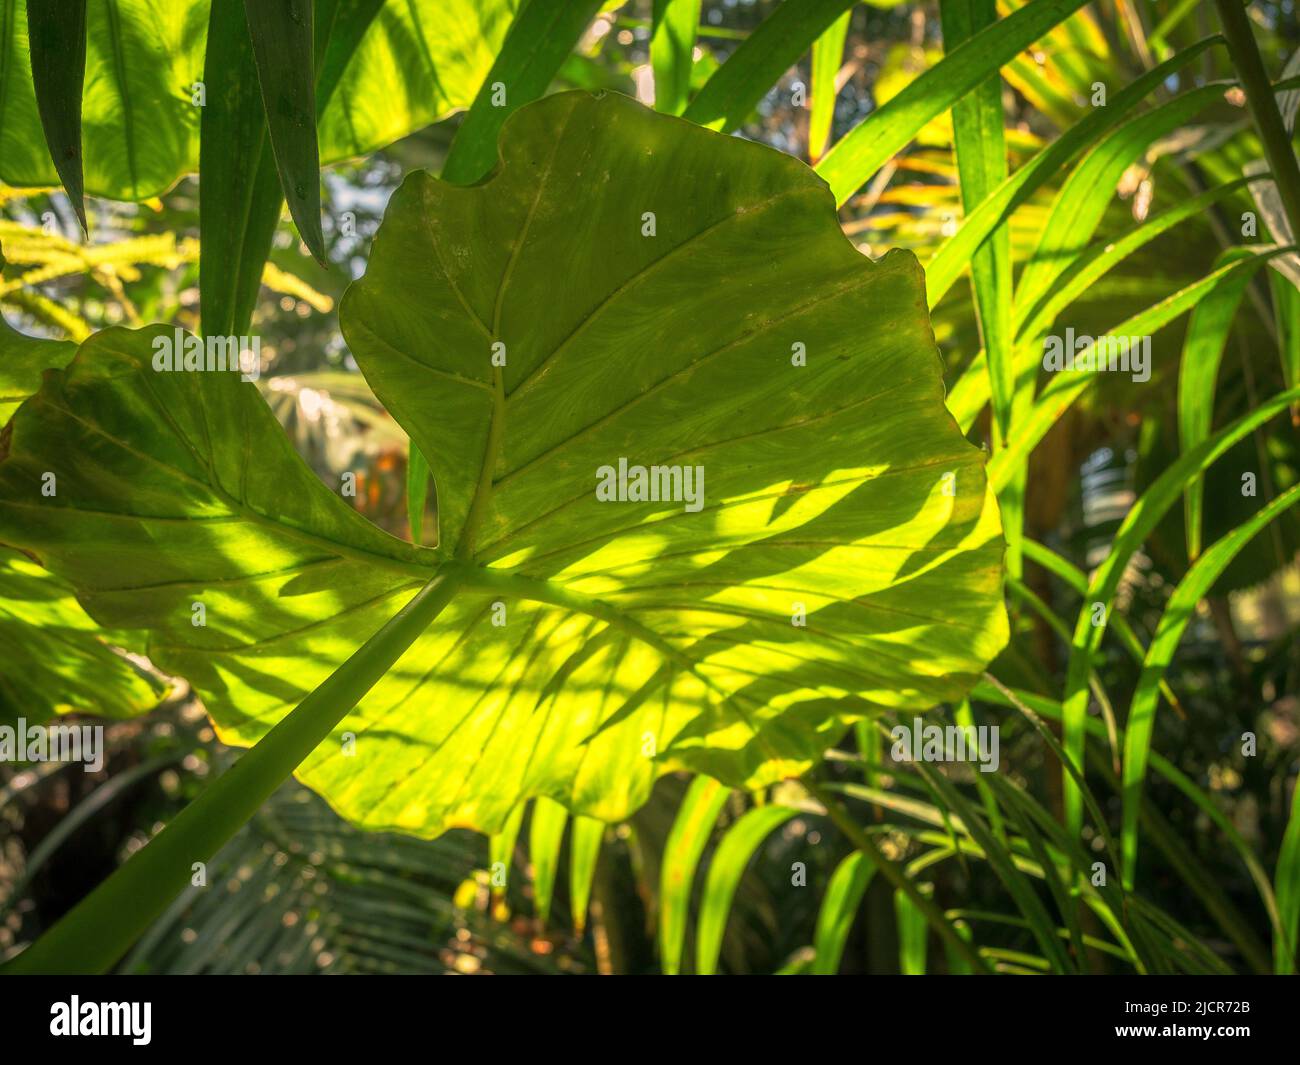 Lush green rainforest plants in a tropical greenhouse. Stock Photo